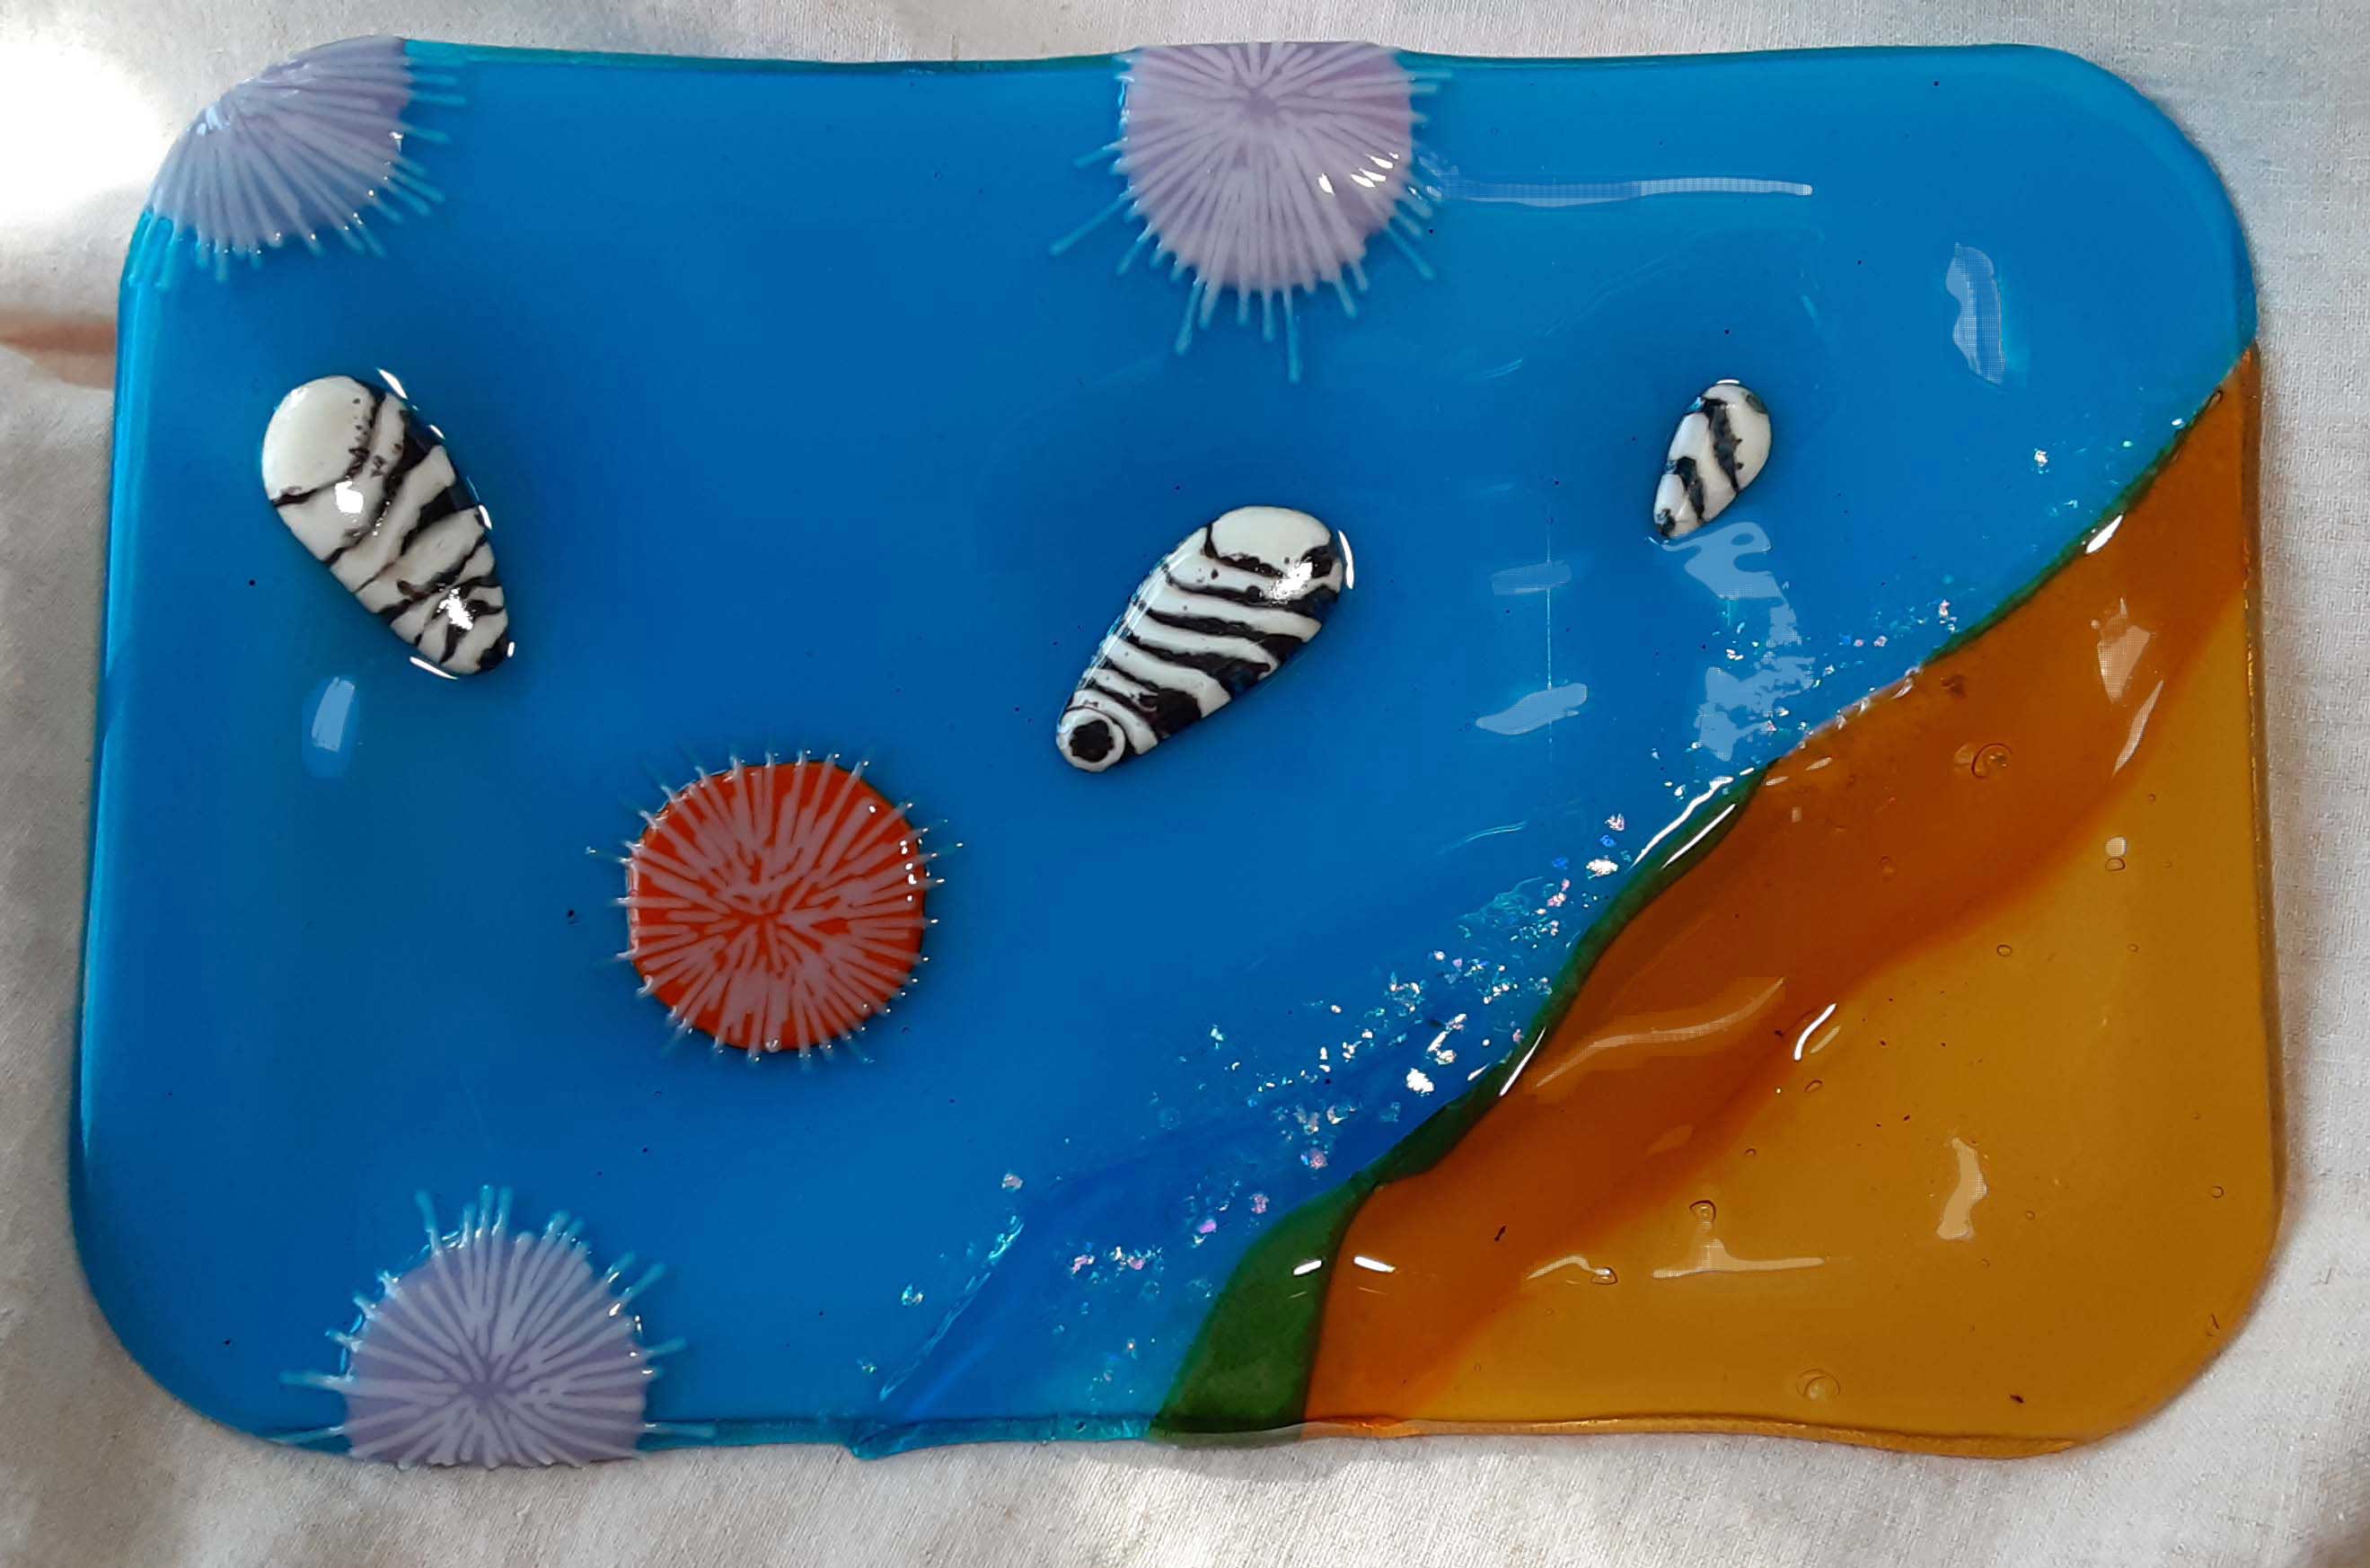 Glass cheese platter with tidal pool colors and sea shells and sea urchins.